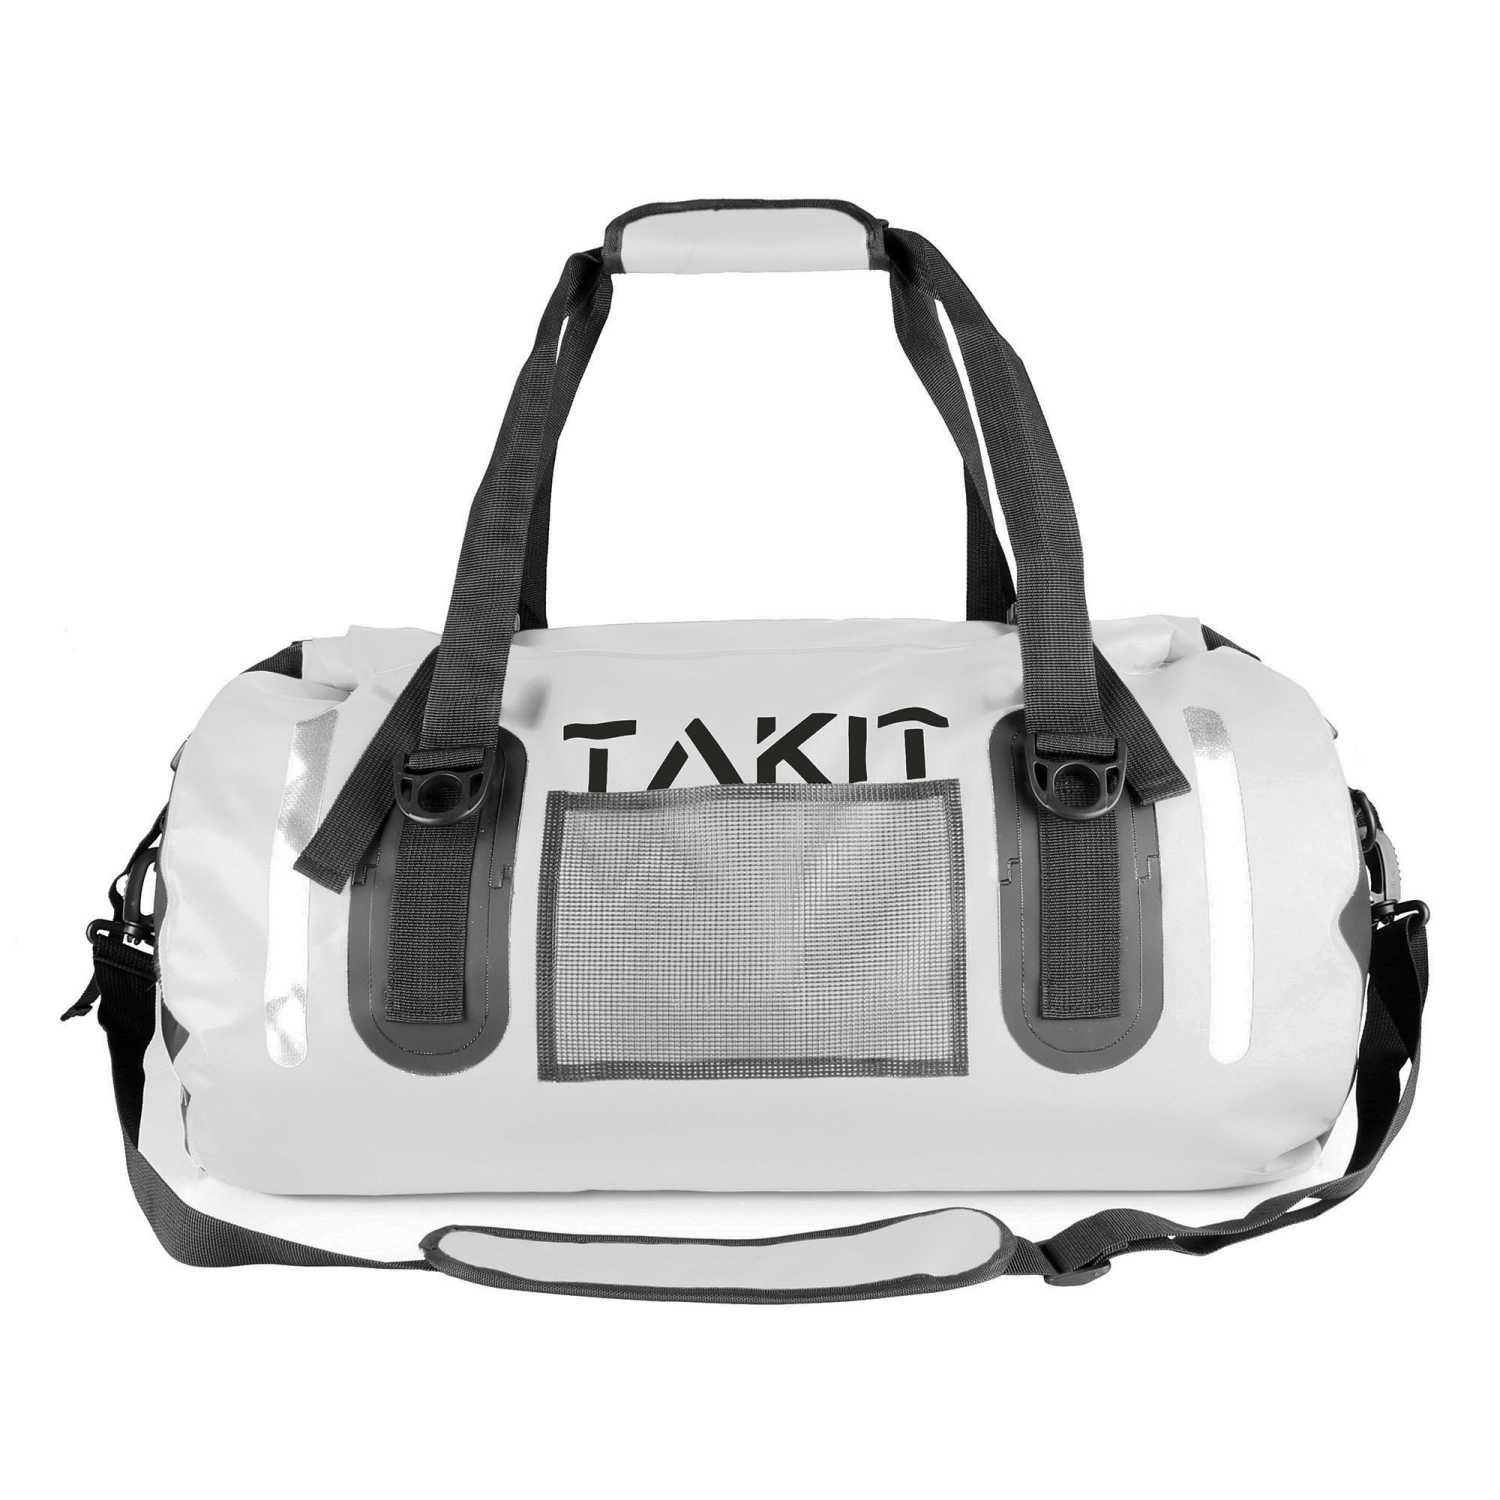 Waterproof Duffle Bag Travel Dry Bag 40L Roll Top 500D PVC for Motorcycle Tail Kayaking Rafting Boating Swimming Camping Hiking Beach Fishing(40L, White)